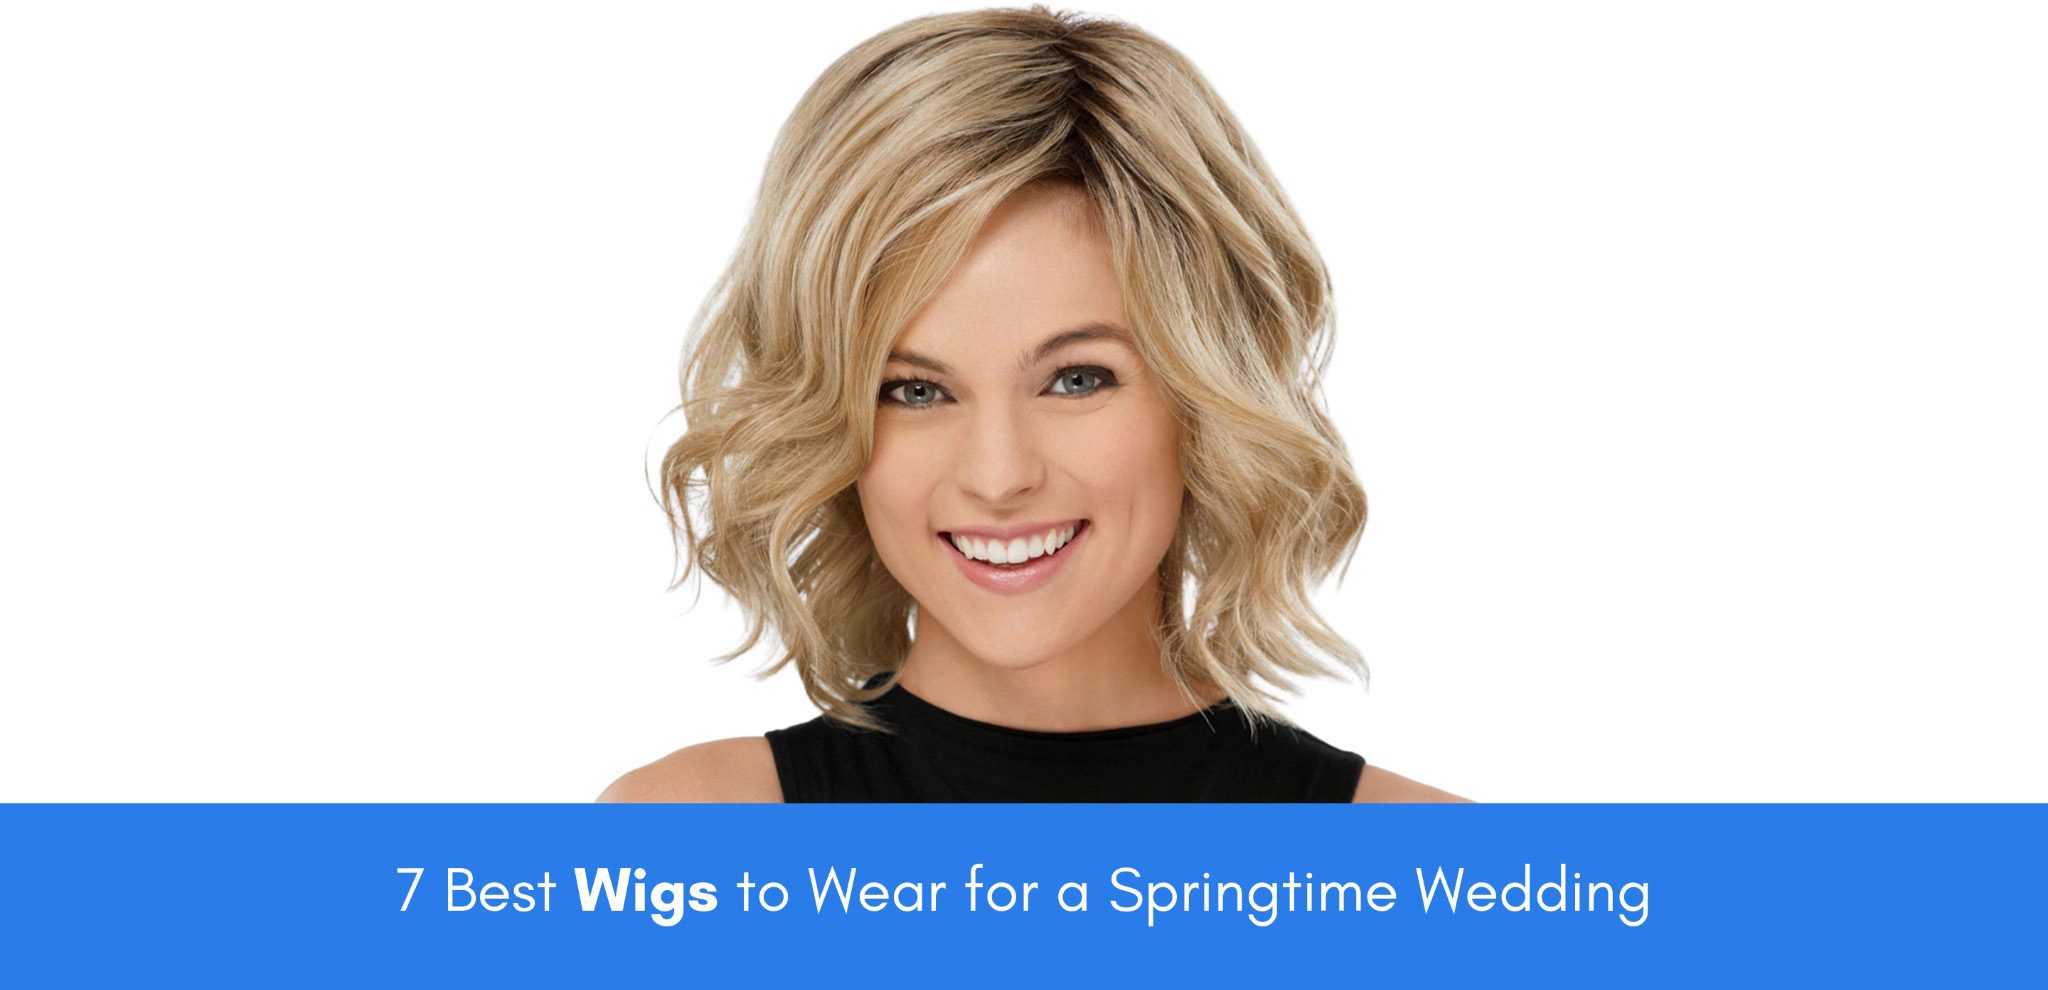 7 best wigs to wear for a springtime wedding